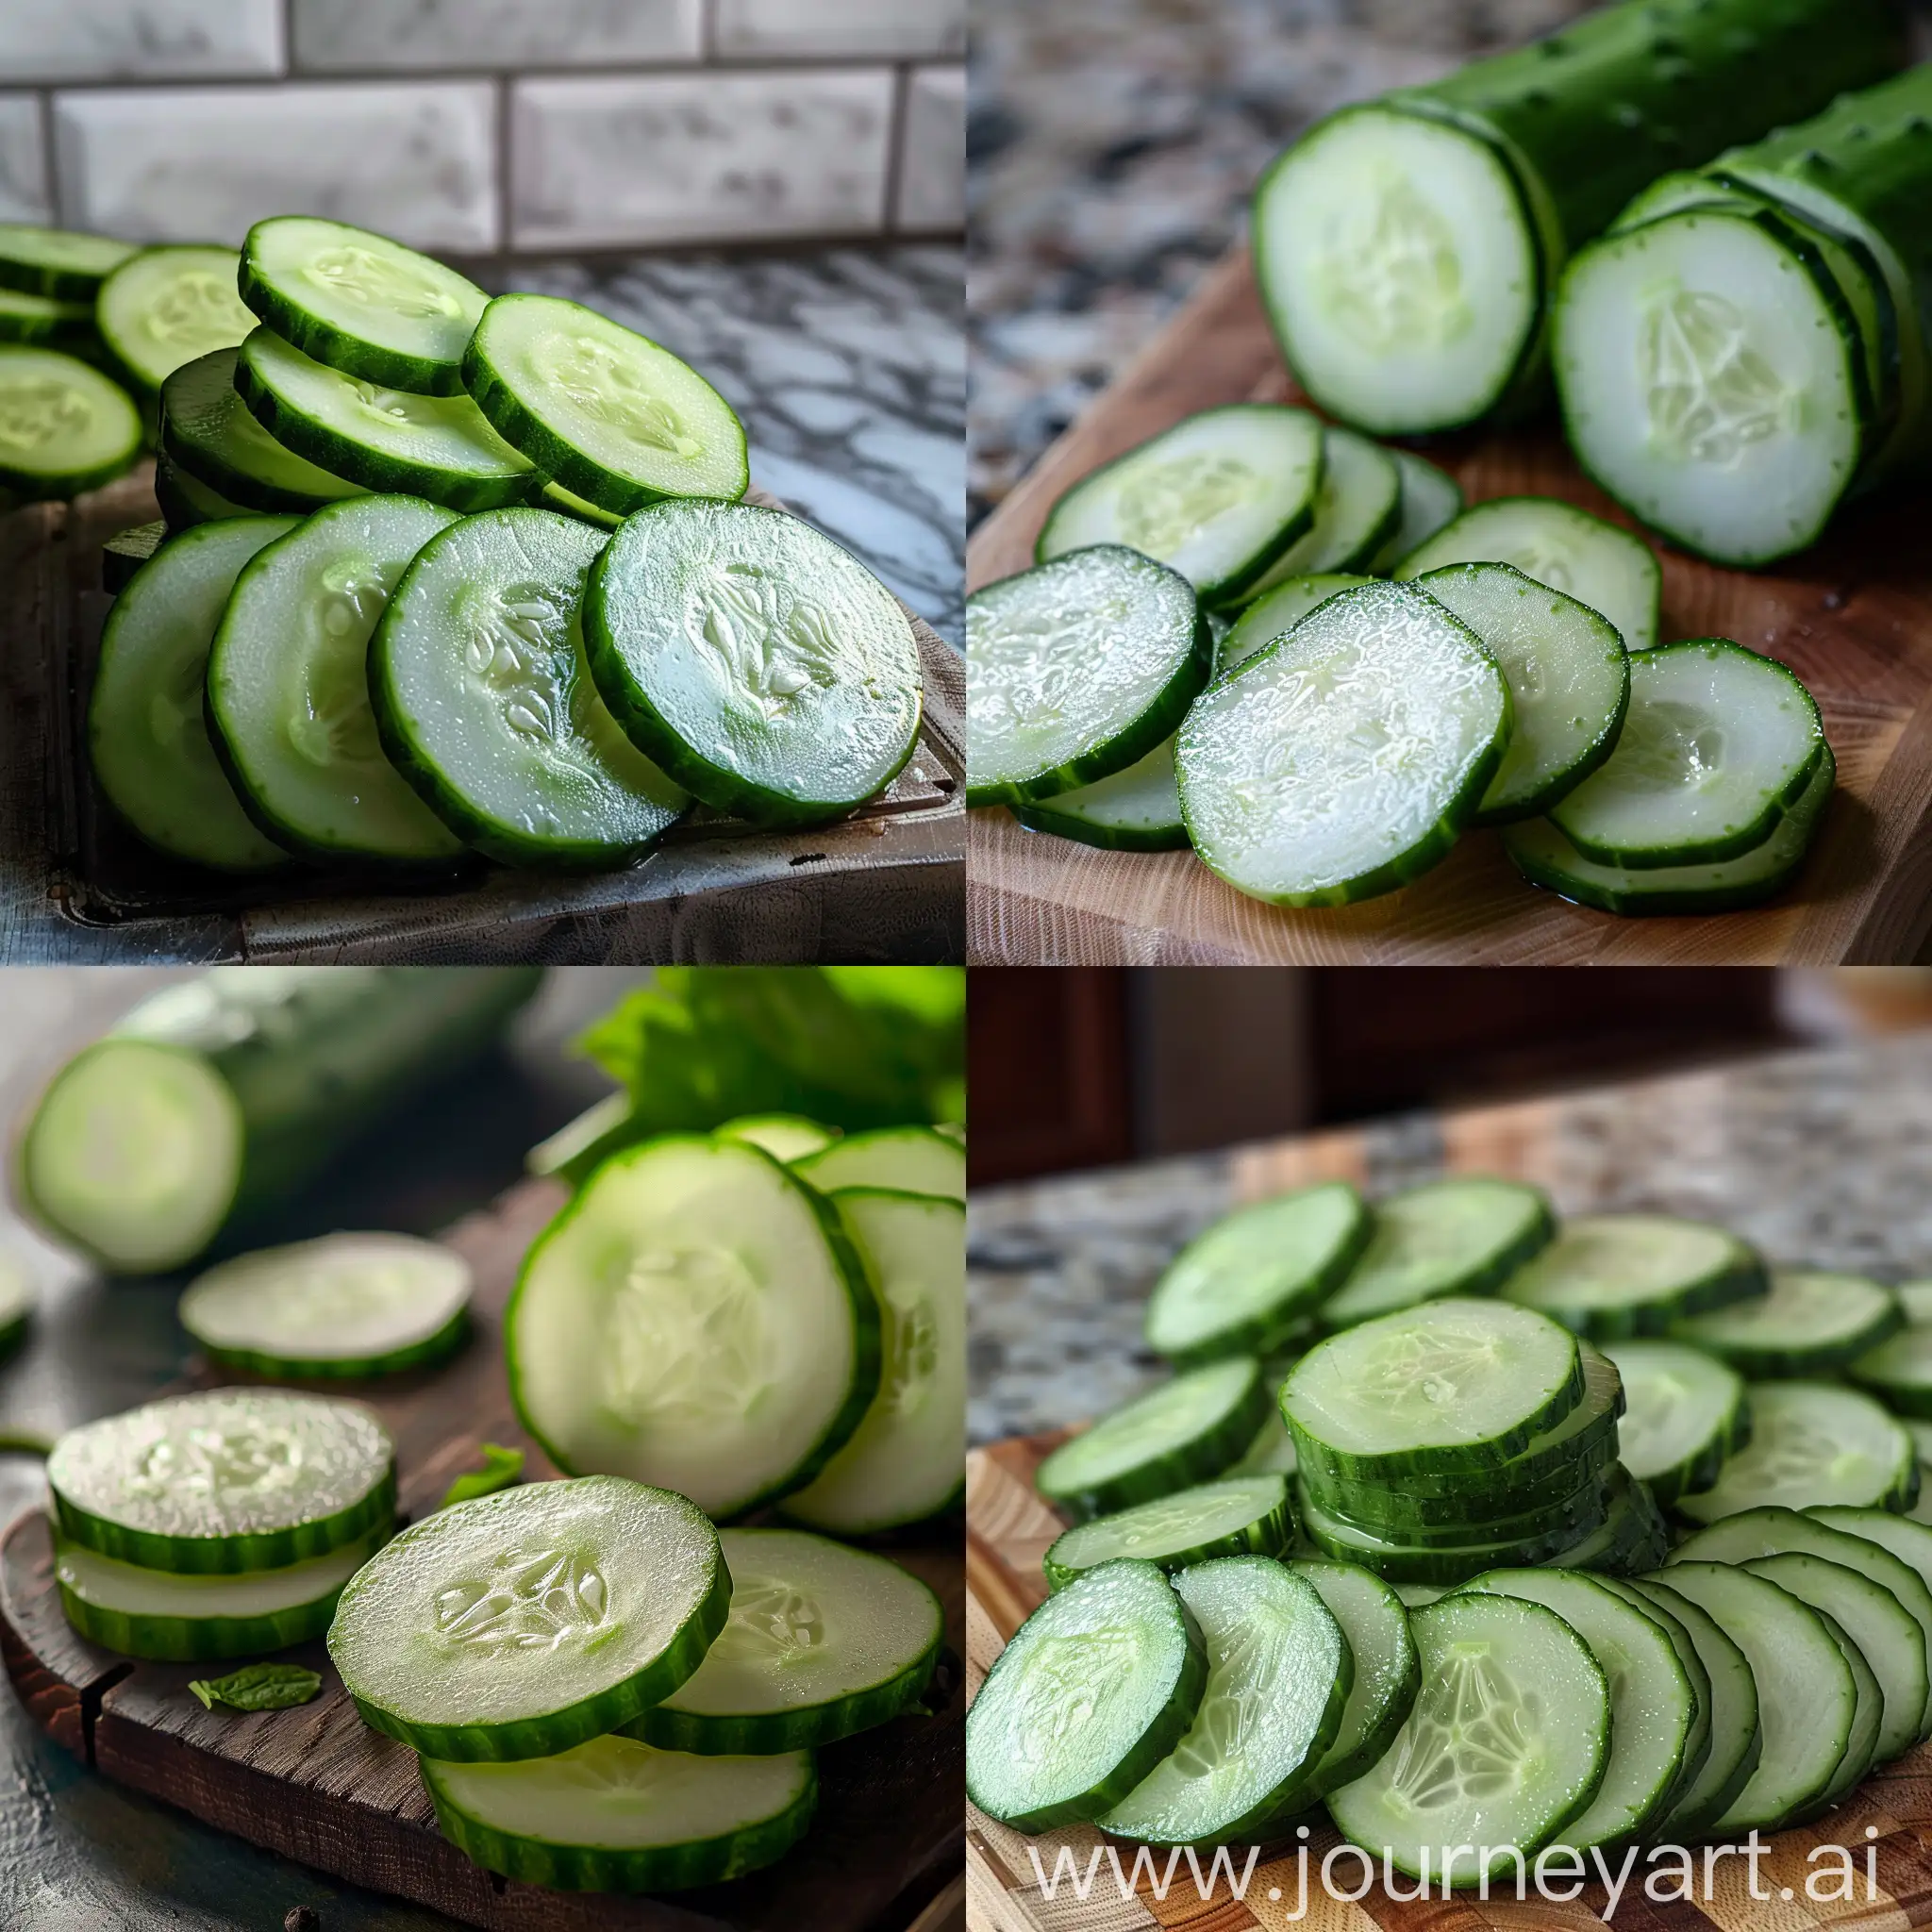 Freshly-Sliced-Cucumbers-on-Wooden-Cutting-Board-in-Sunlit-Kitchen